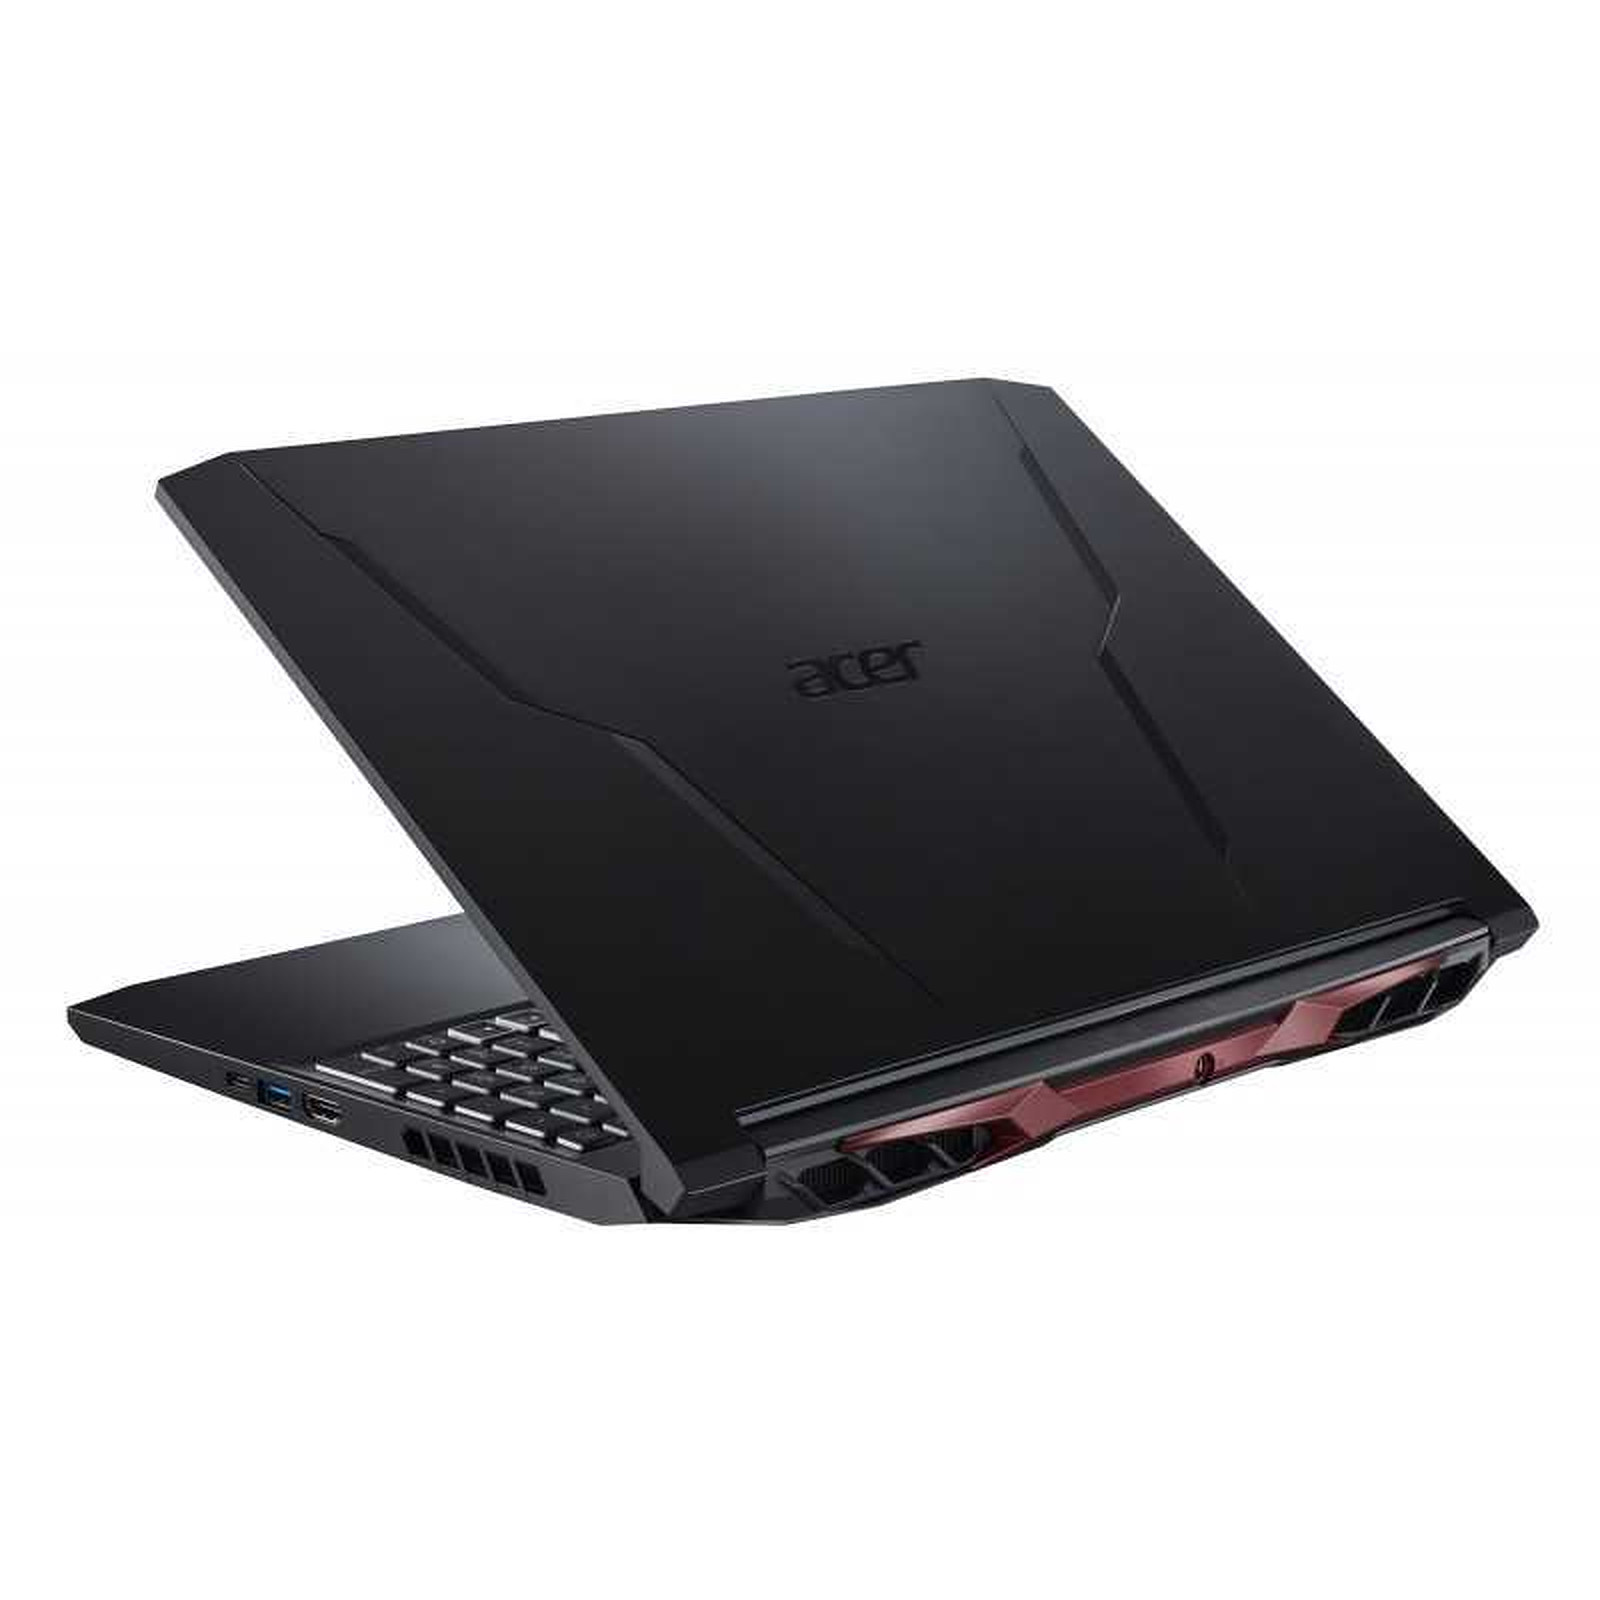 Acer NH.QEKEF.001 - PC portable Acer - grosbill-pro.com - 3